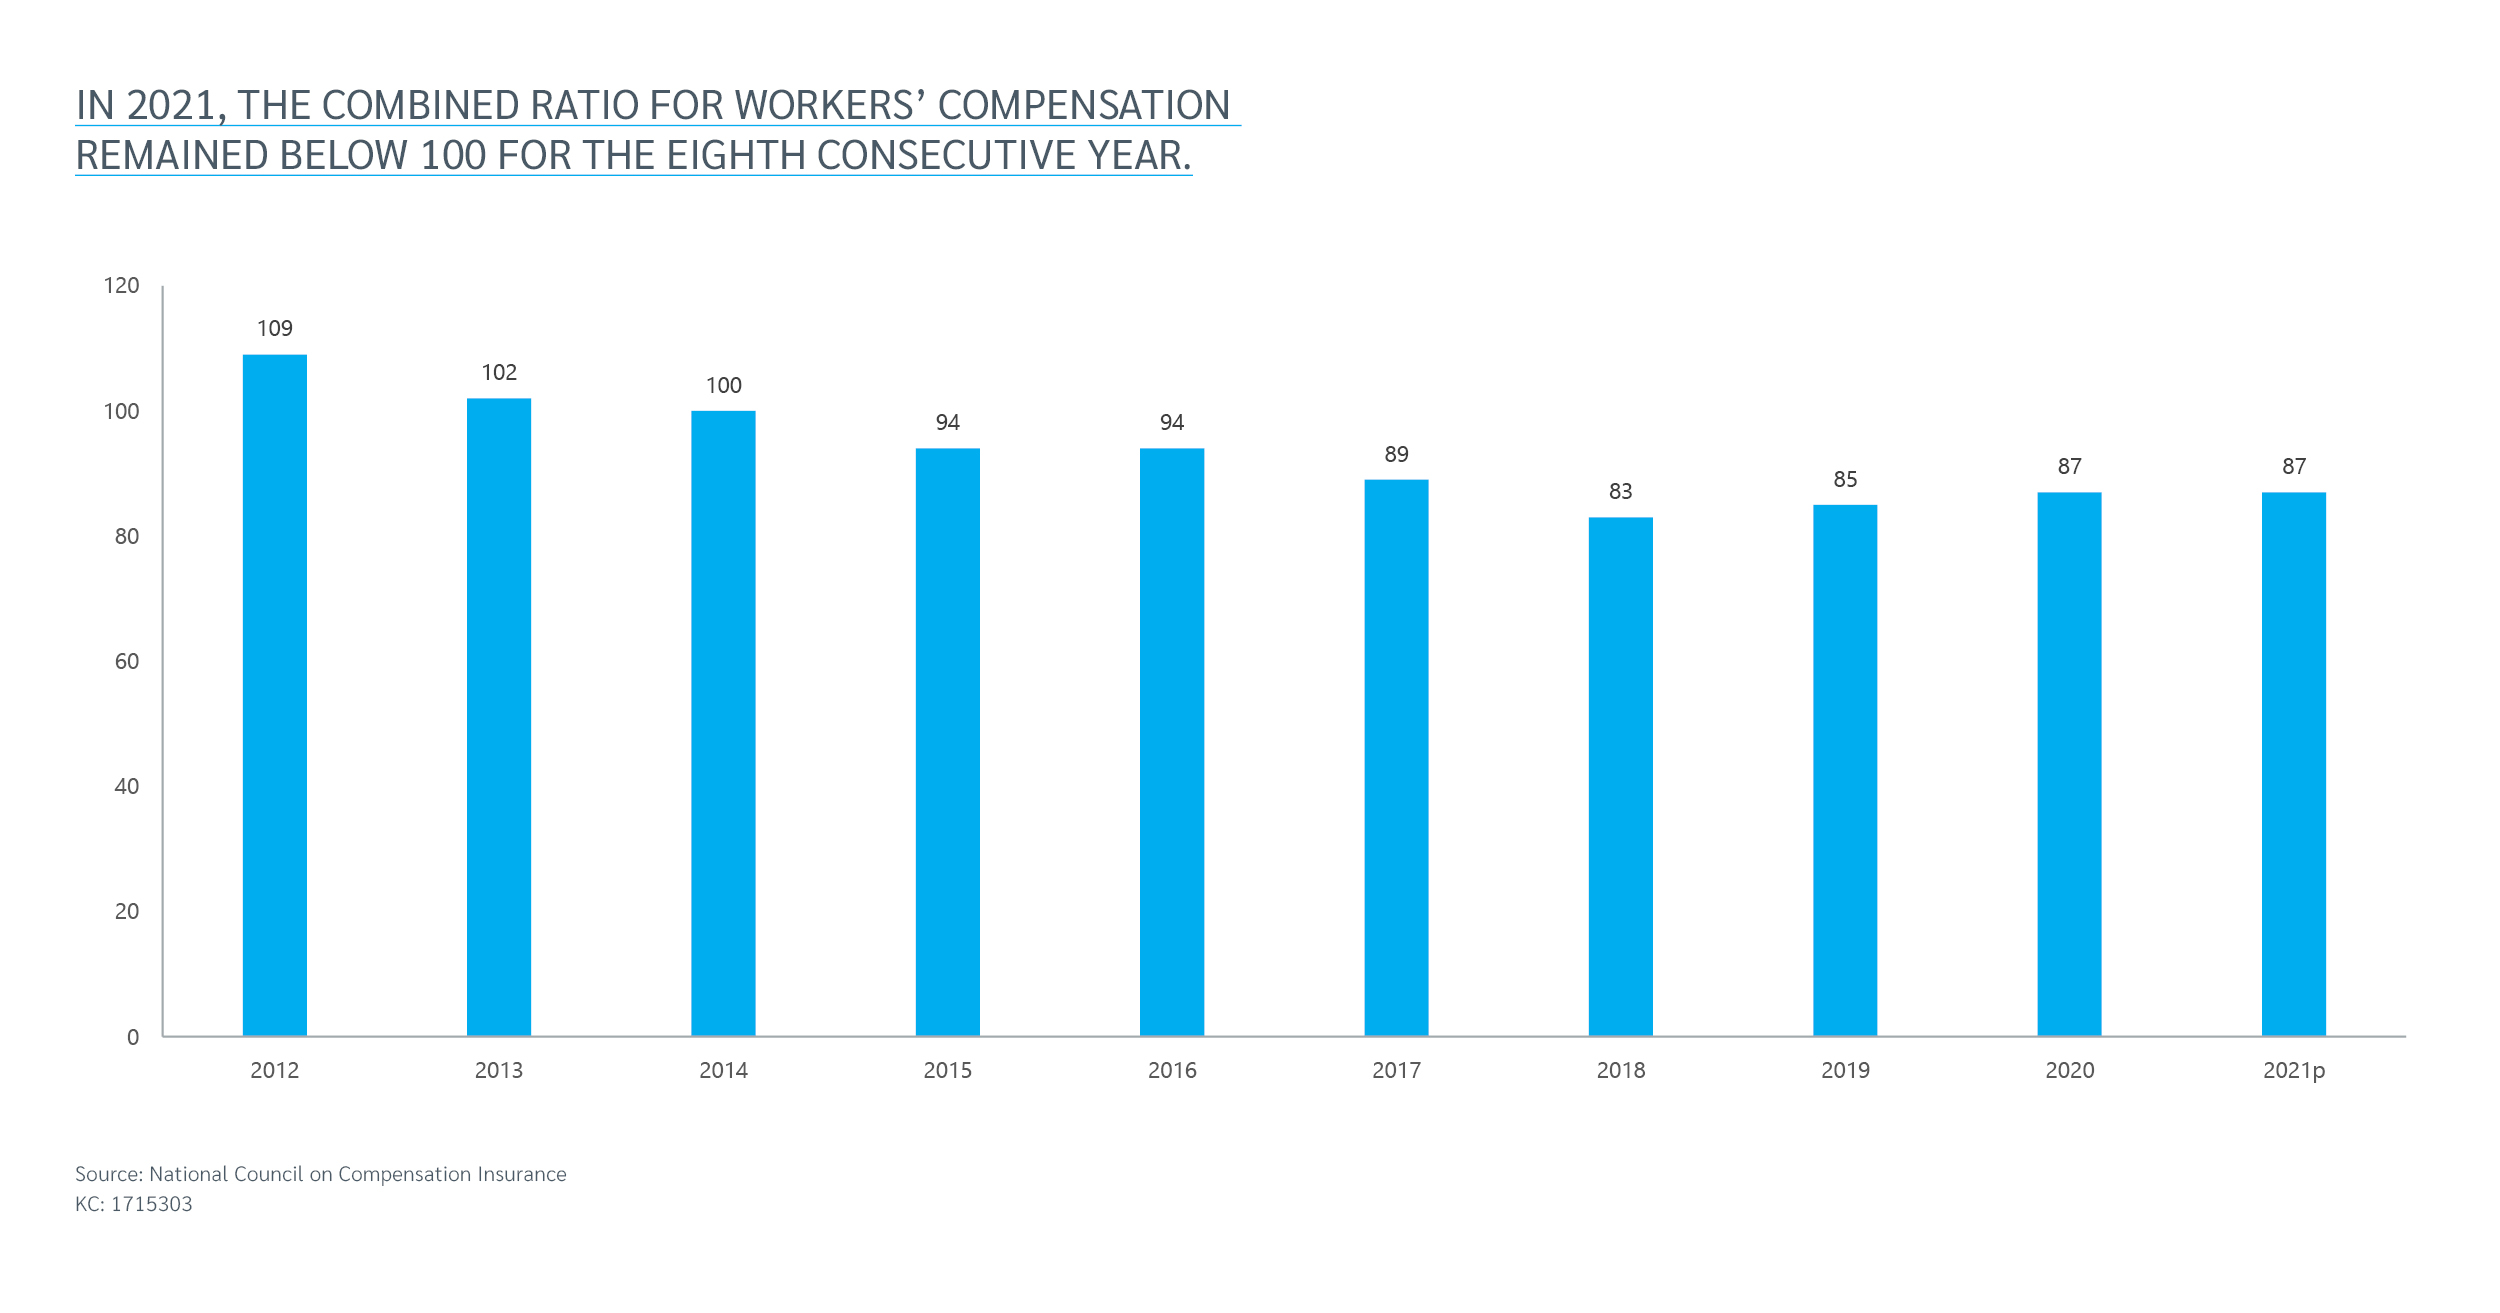 Signs Point to Continued Health in Workers’ Compensation Market